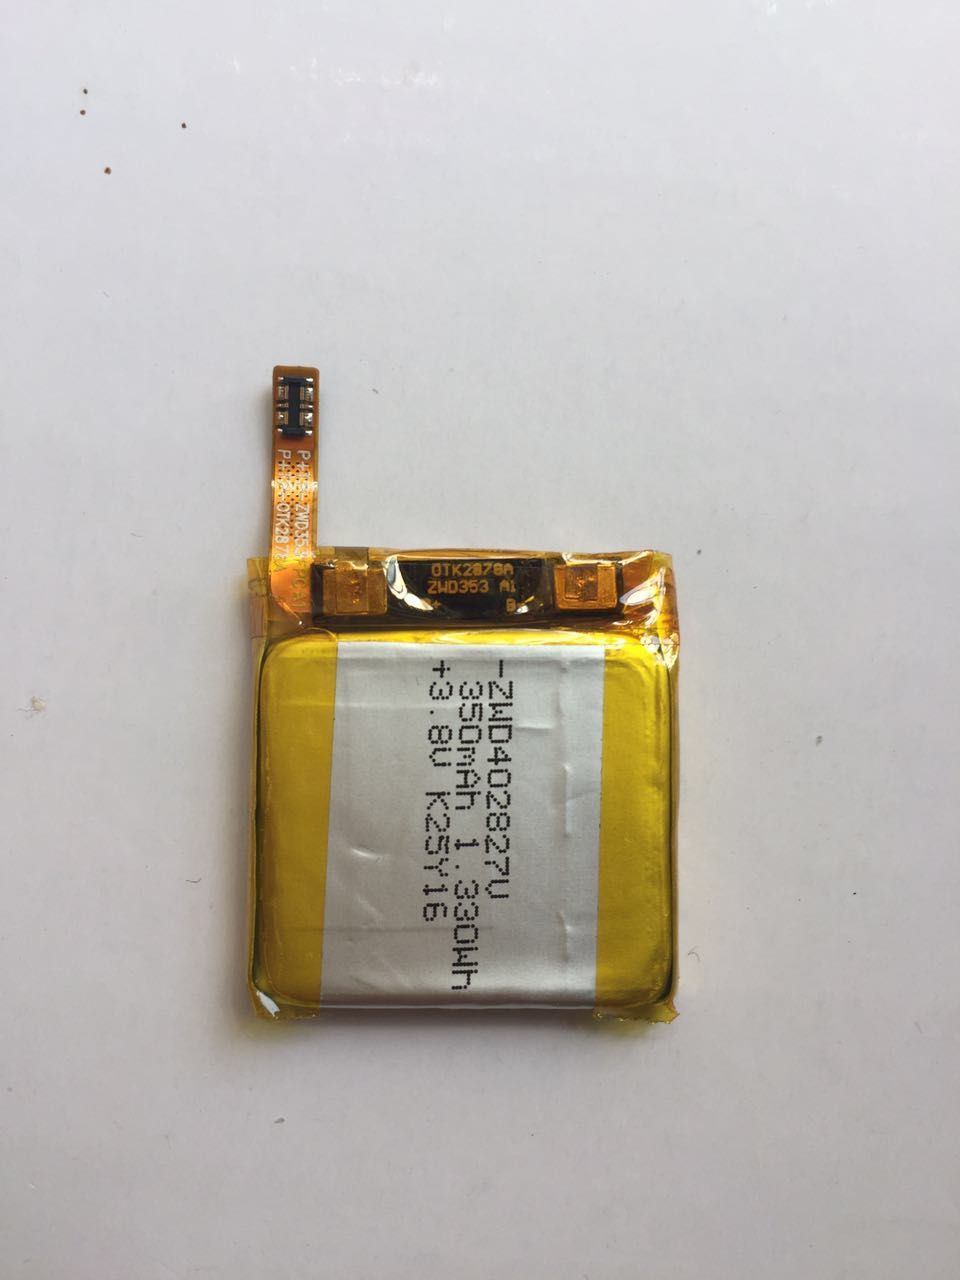 Details about   Genuine 3.8V 420mah High Quality Battery Sony Smartwatch 3 Model SWR50 New 